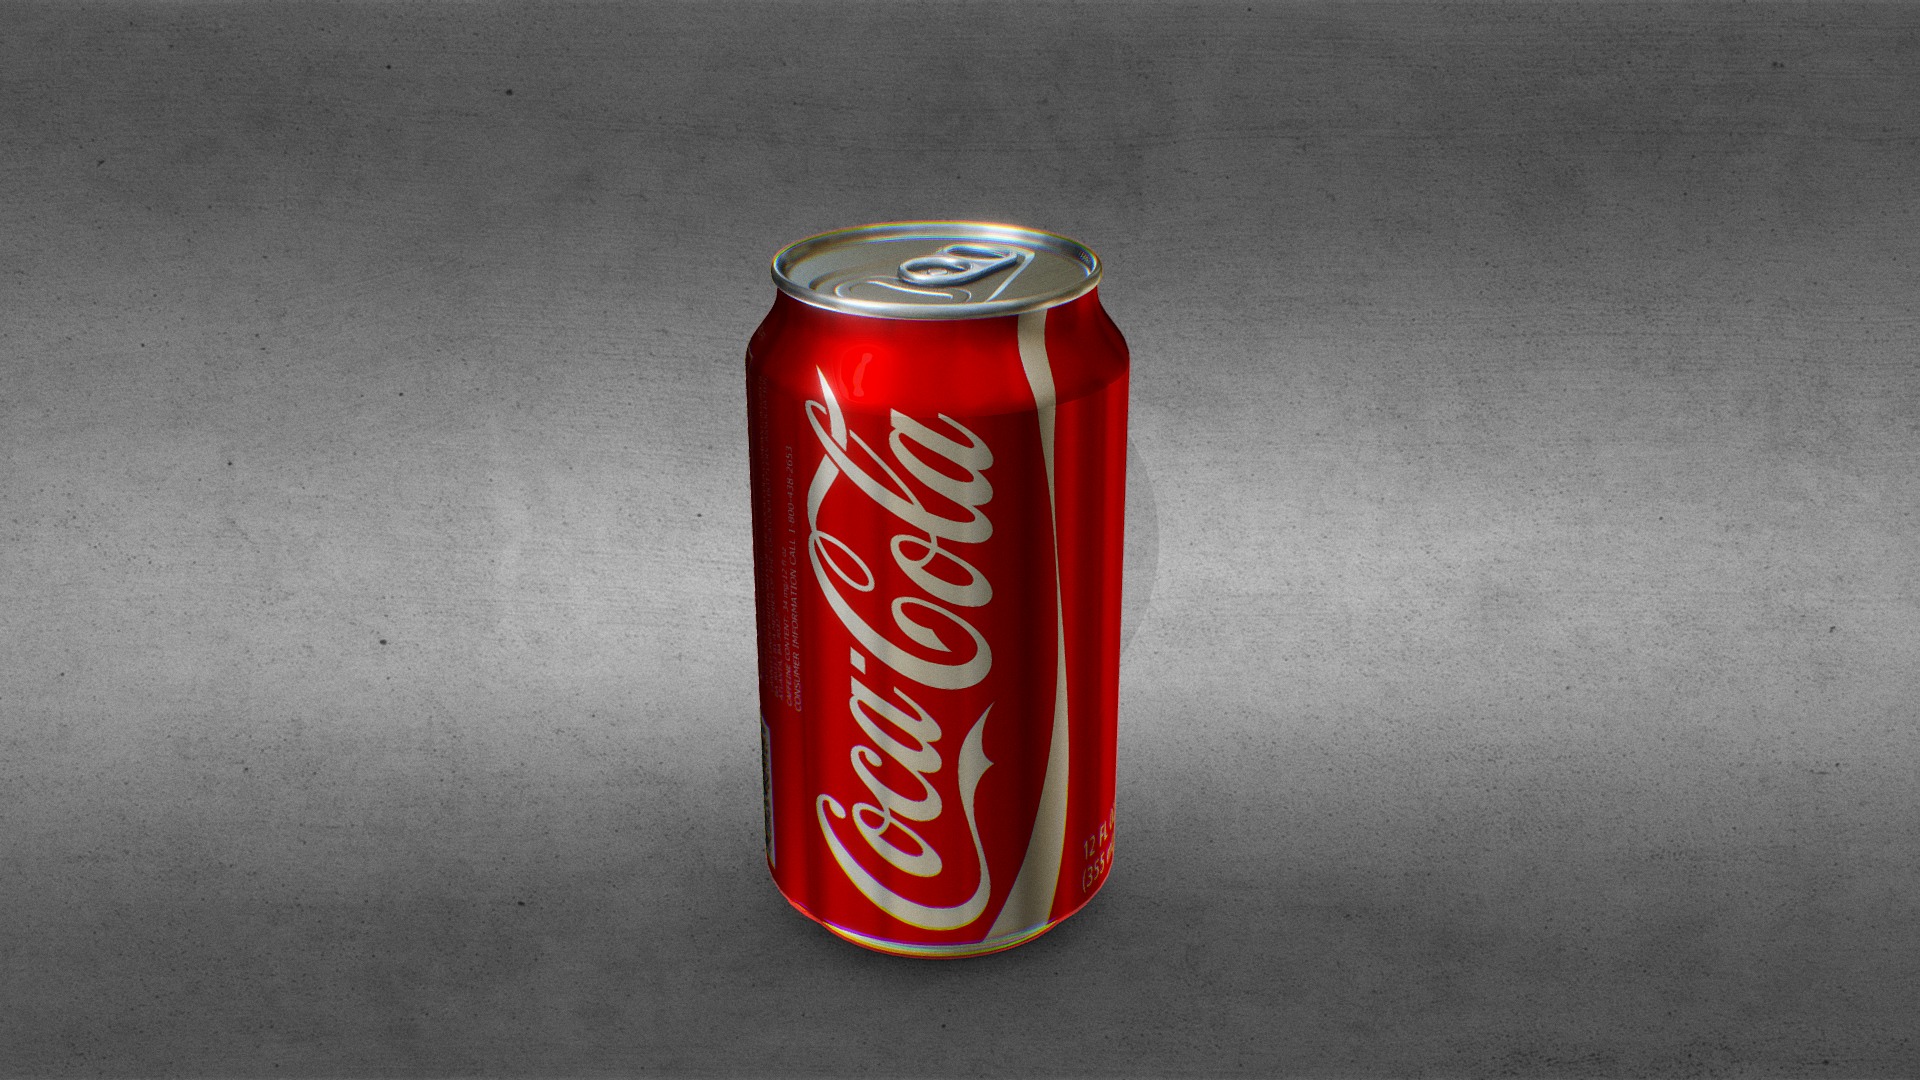 3D model Coke Soda Can - This is a 3D model of the Coke Soda Can. The 3D model is about a red can of soda.